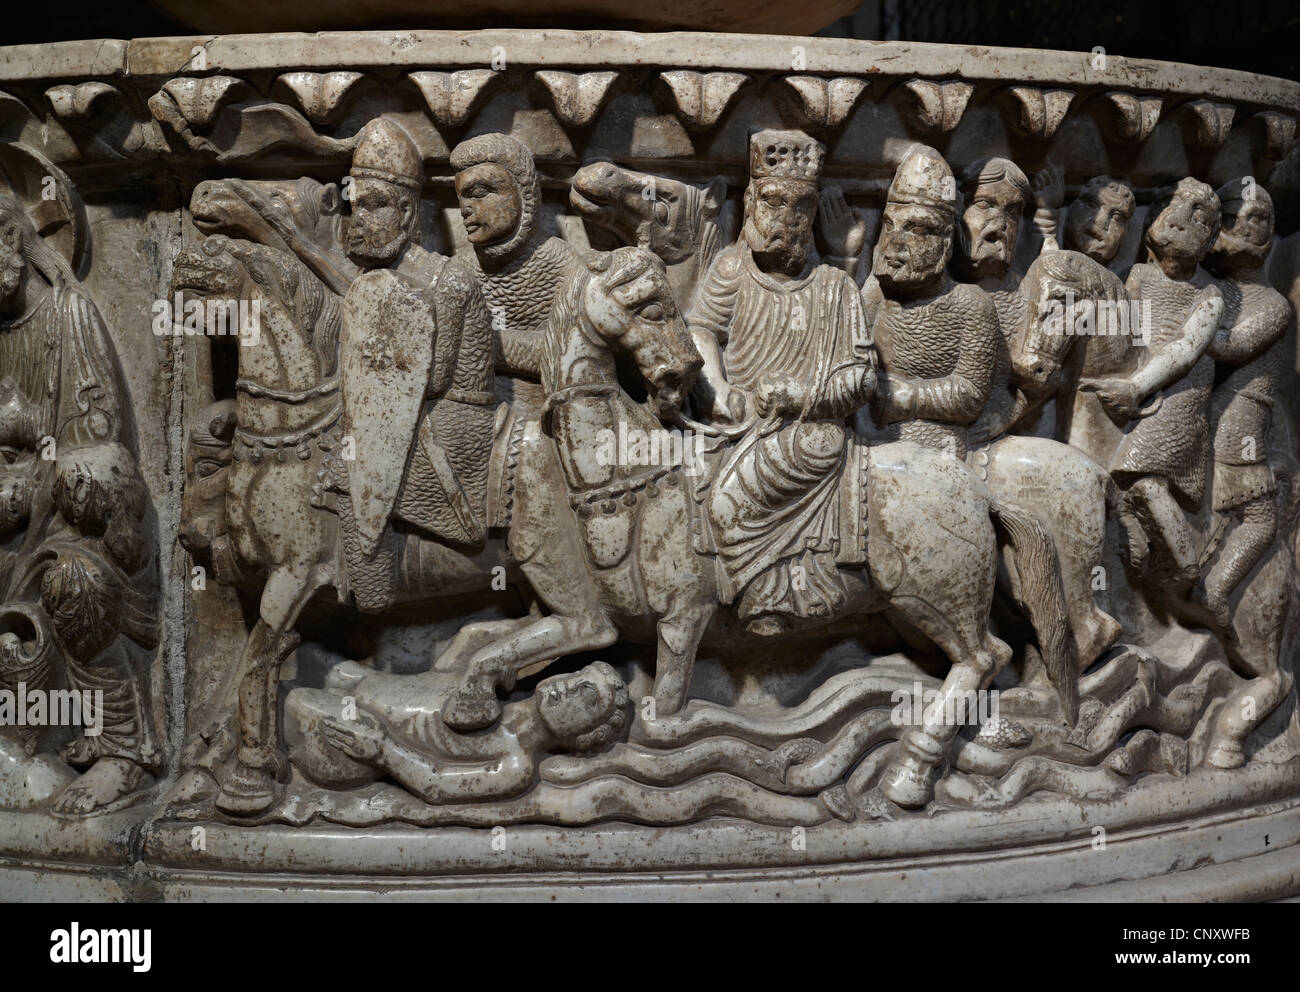 Church of San Frediano, Lucca, Italy. Detail of medieval horsemen and knights on 12th century Romanesque baptismal font Stock Photo